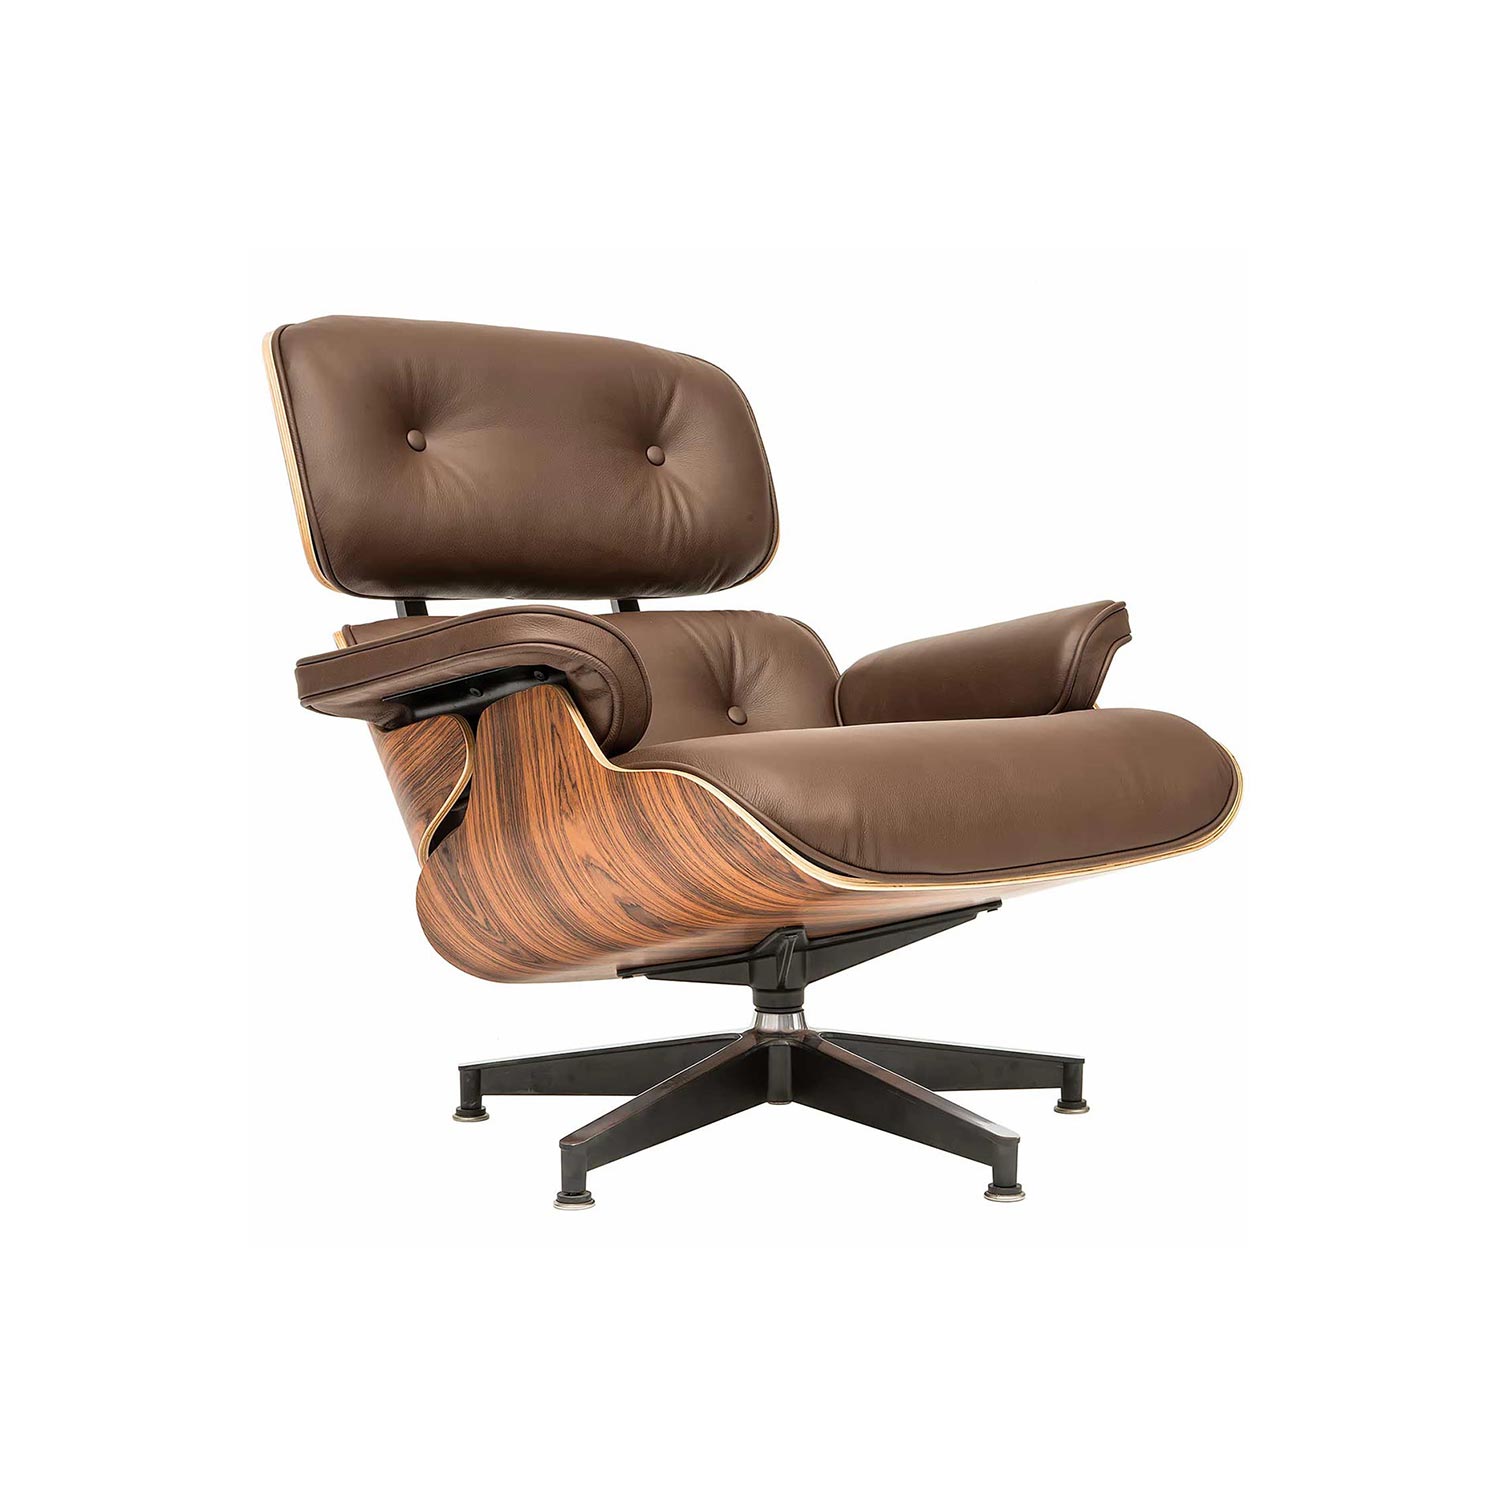 Eames Designed Lounge Chair With, Eames Leather Lounge Chair